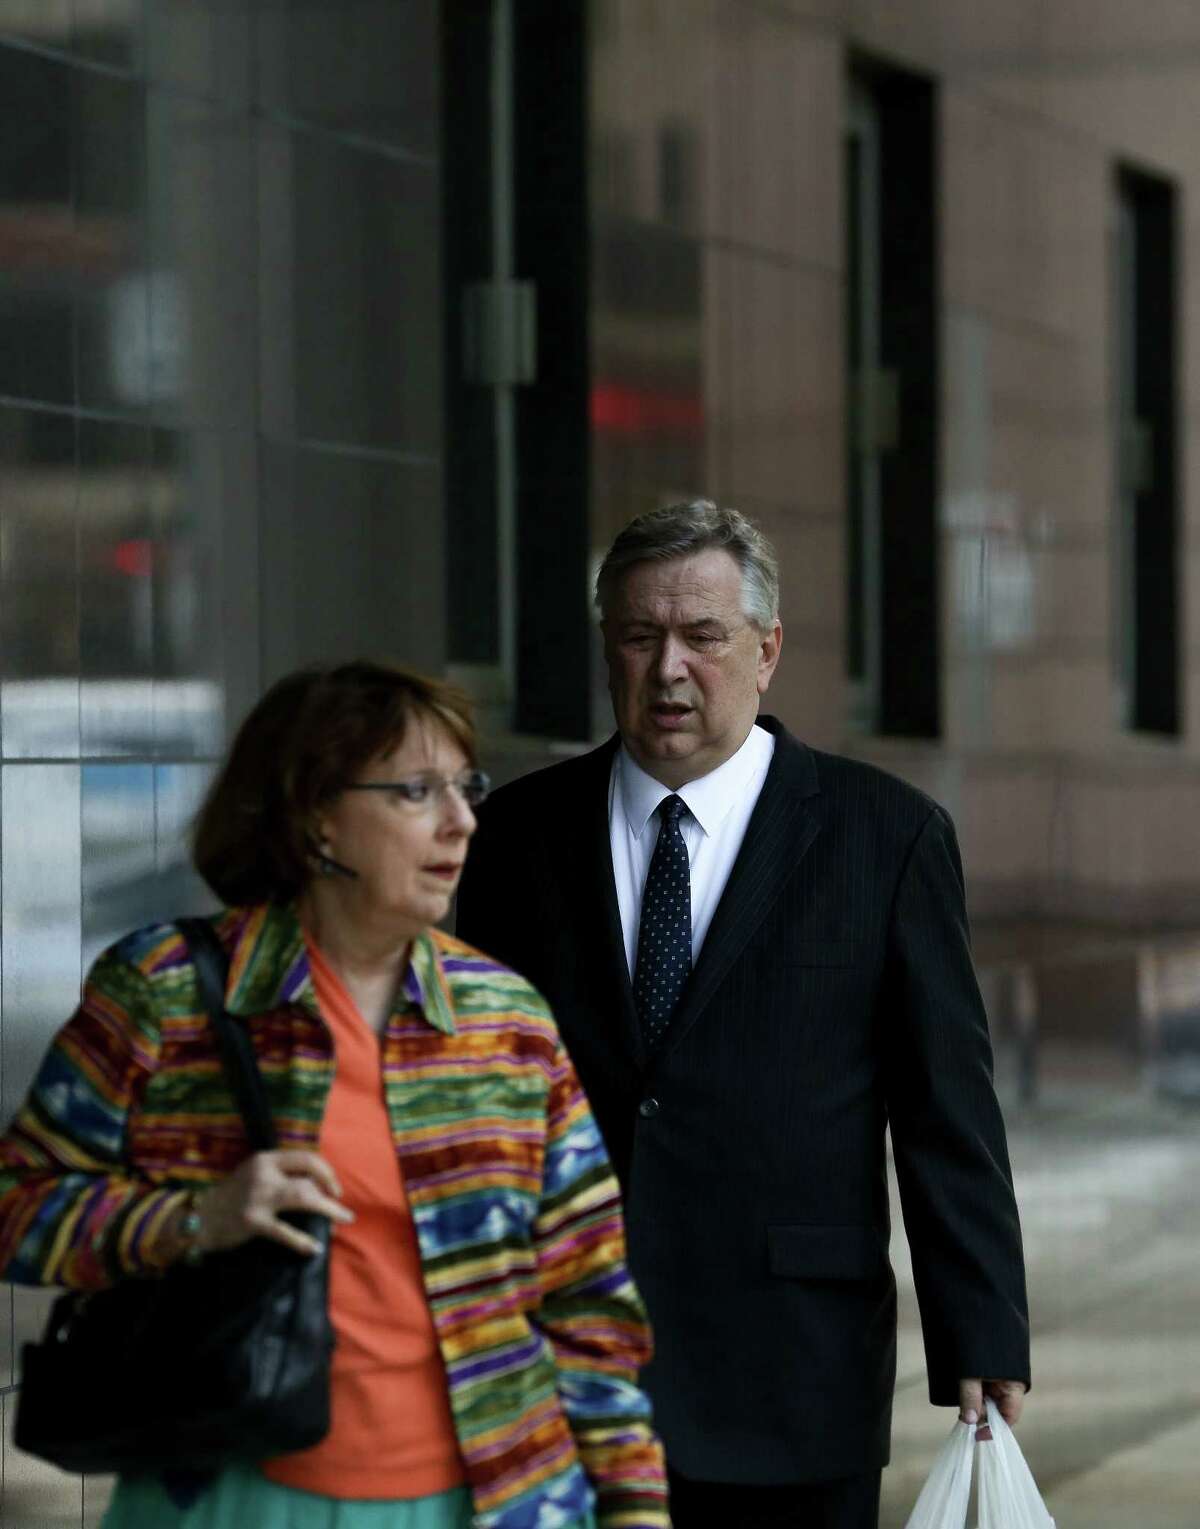 Former Congressman Steve Stockman Convicted On Federal Corruption Charges 9048